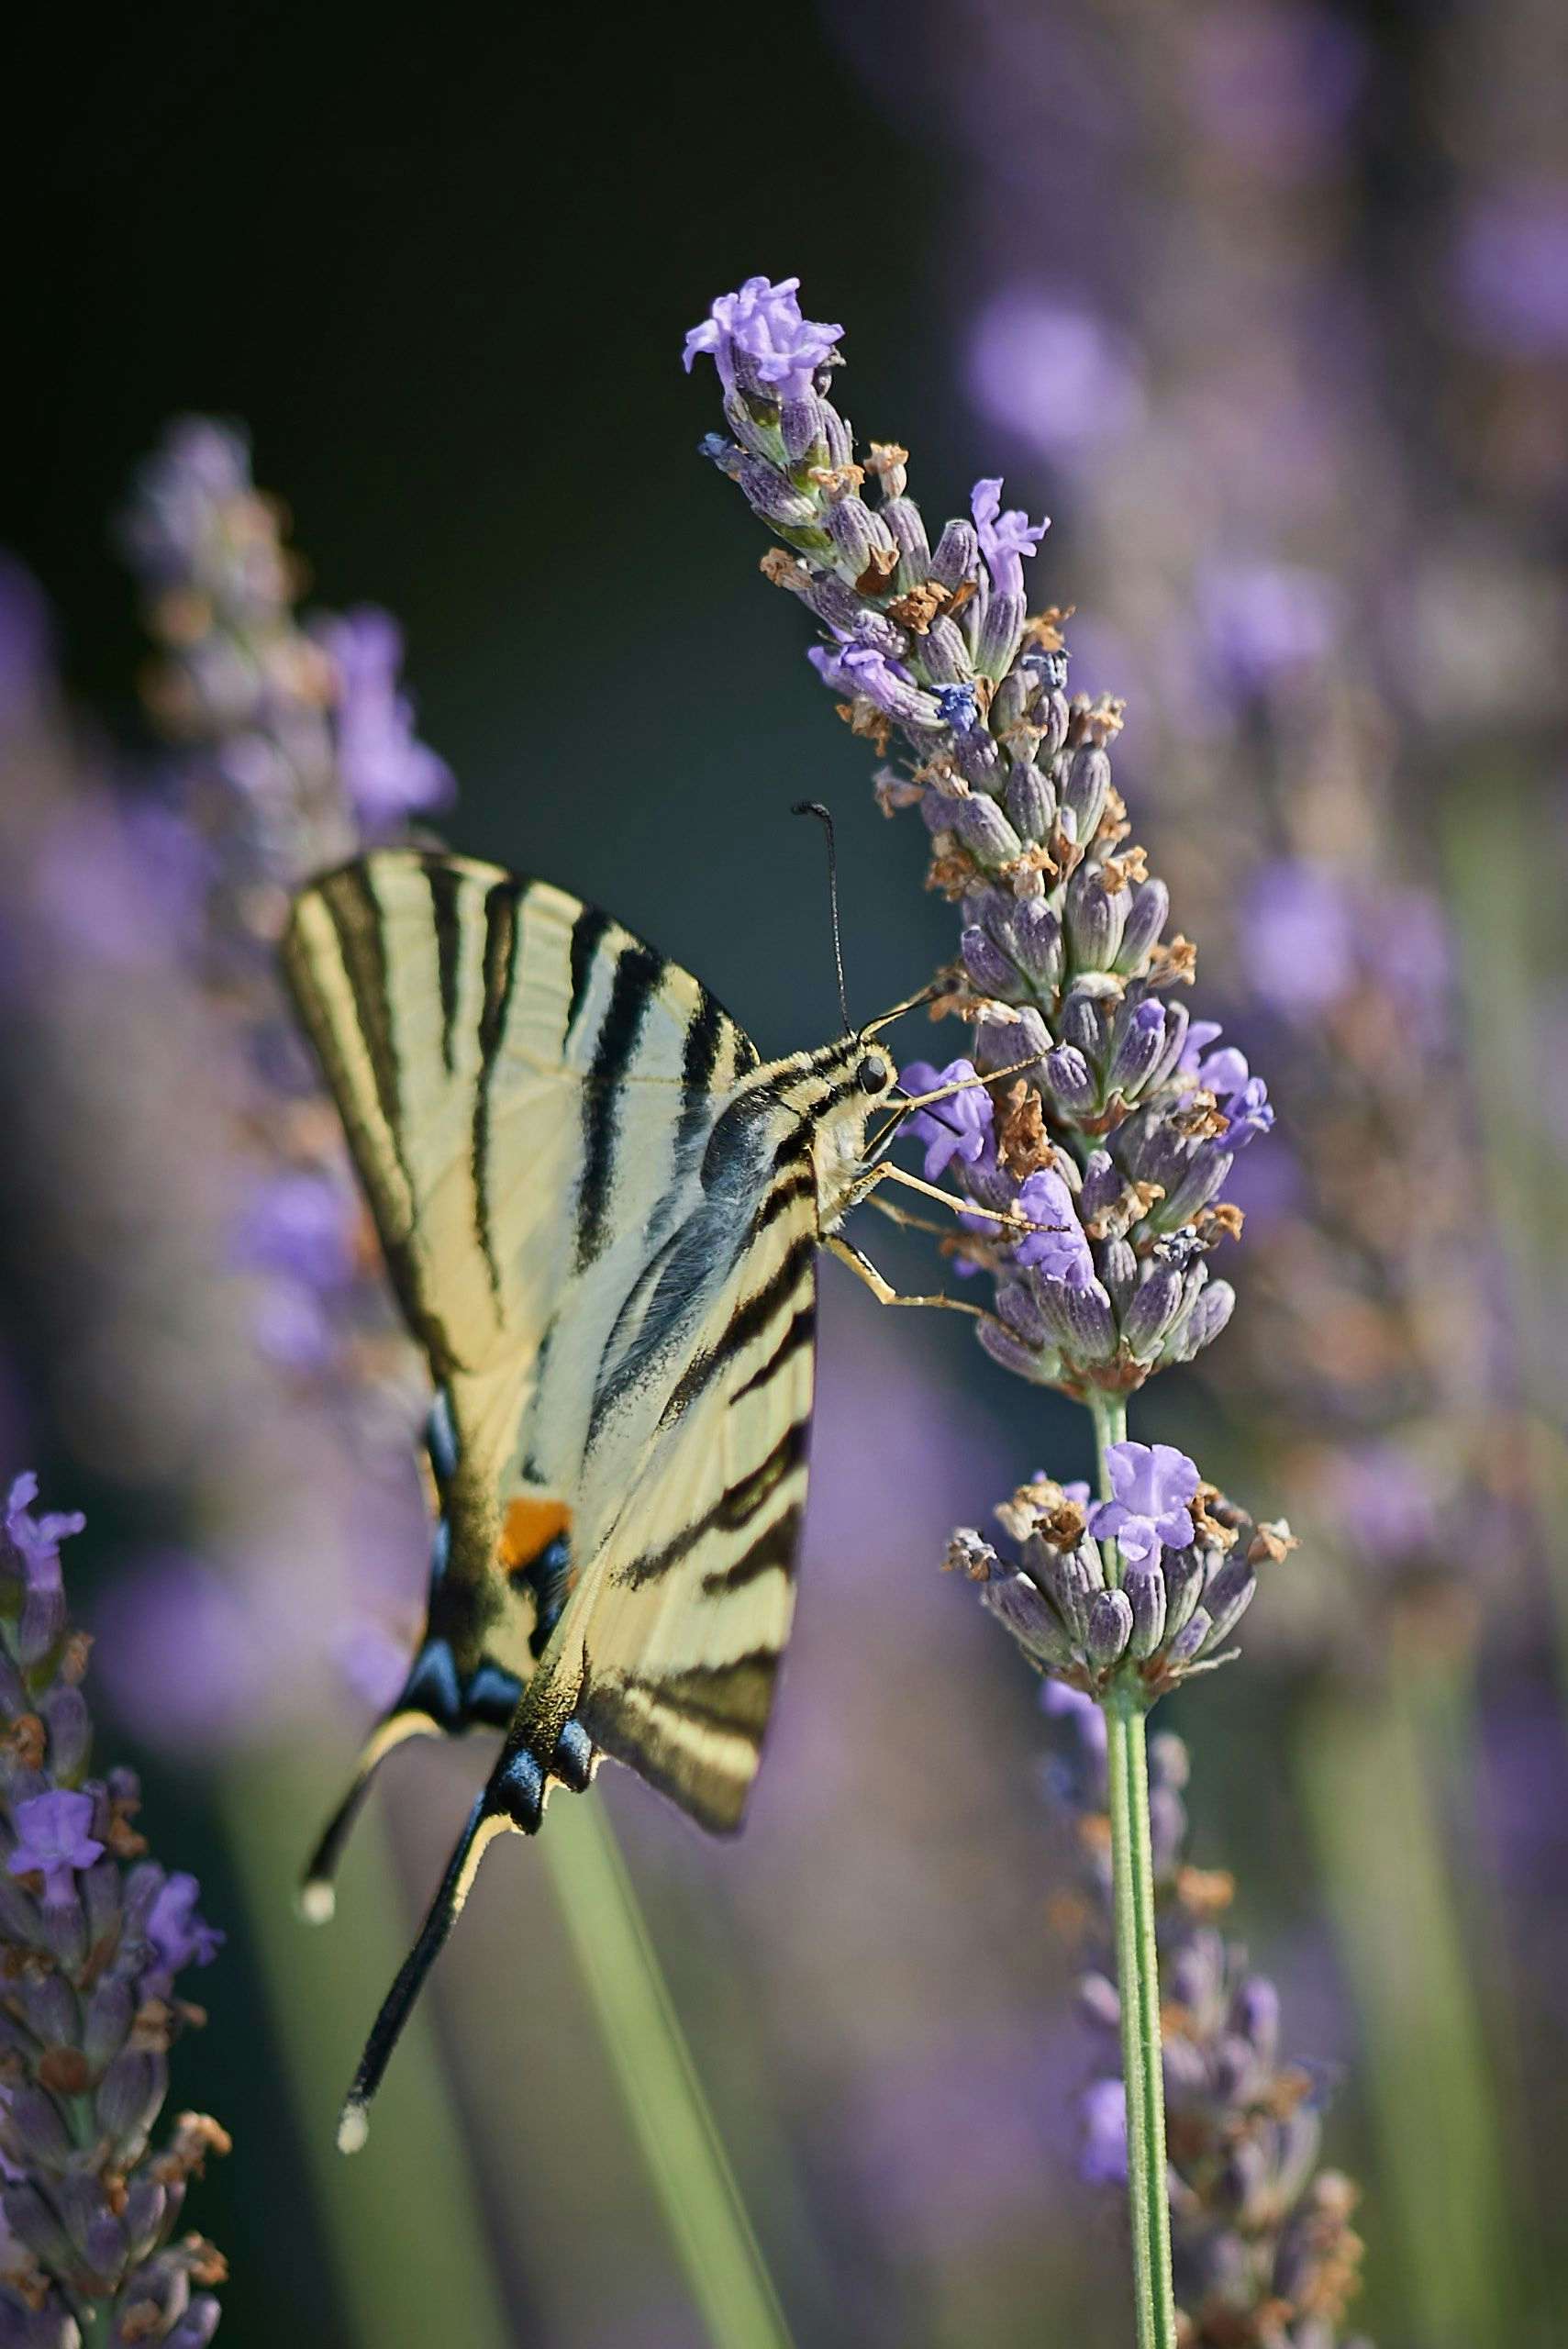 Scarce swallowtail butterfly feeding on lavender. Photography by Xavier Wendling.